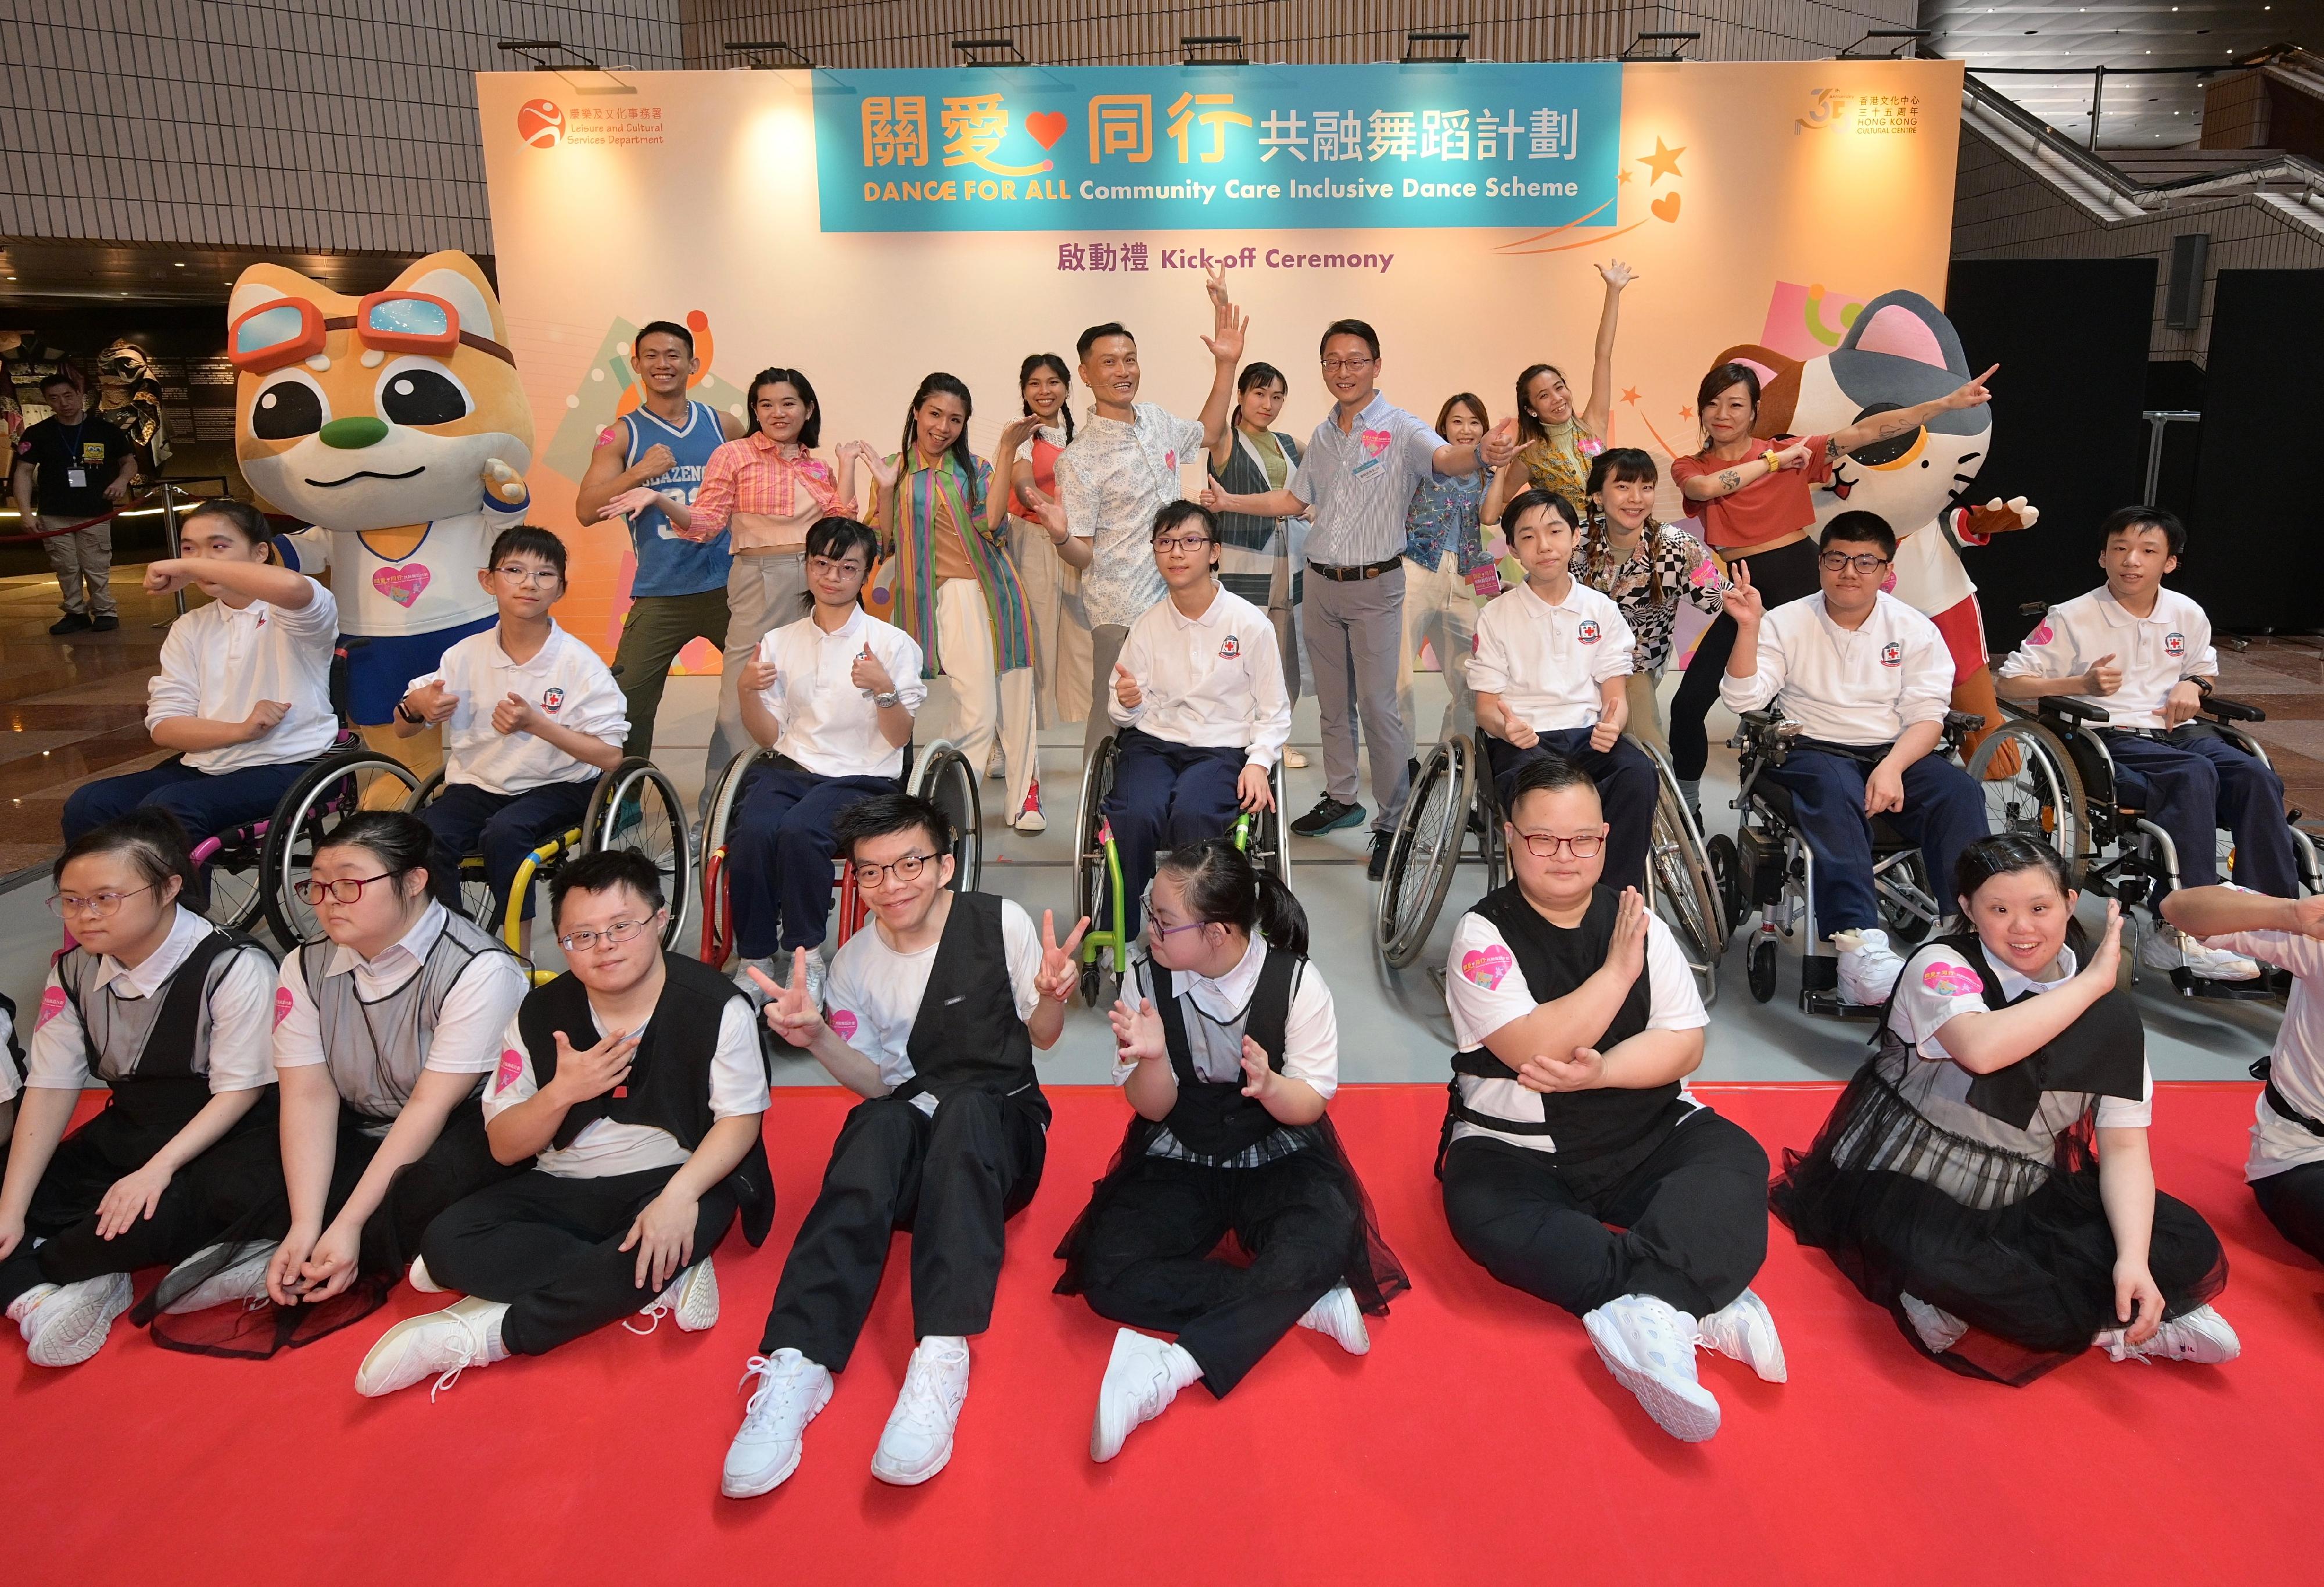 The "Dance for All" Community Care Inclusive Dance Scheme, organised by the Leisure and Cultural Services Department, was launched today (May 5). Over the next 15 months, a series of activities will take place at the Hong Kong Cultural Centre, including an inclusive dance carnival, workshops,  dance performances, a finale performance by the scheme’s participants and more.